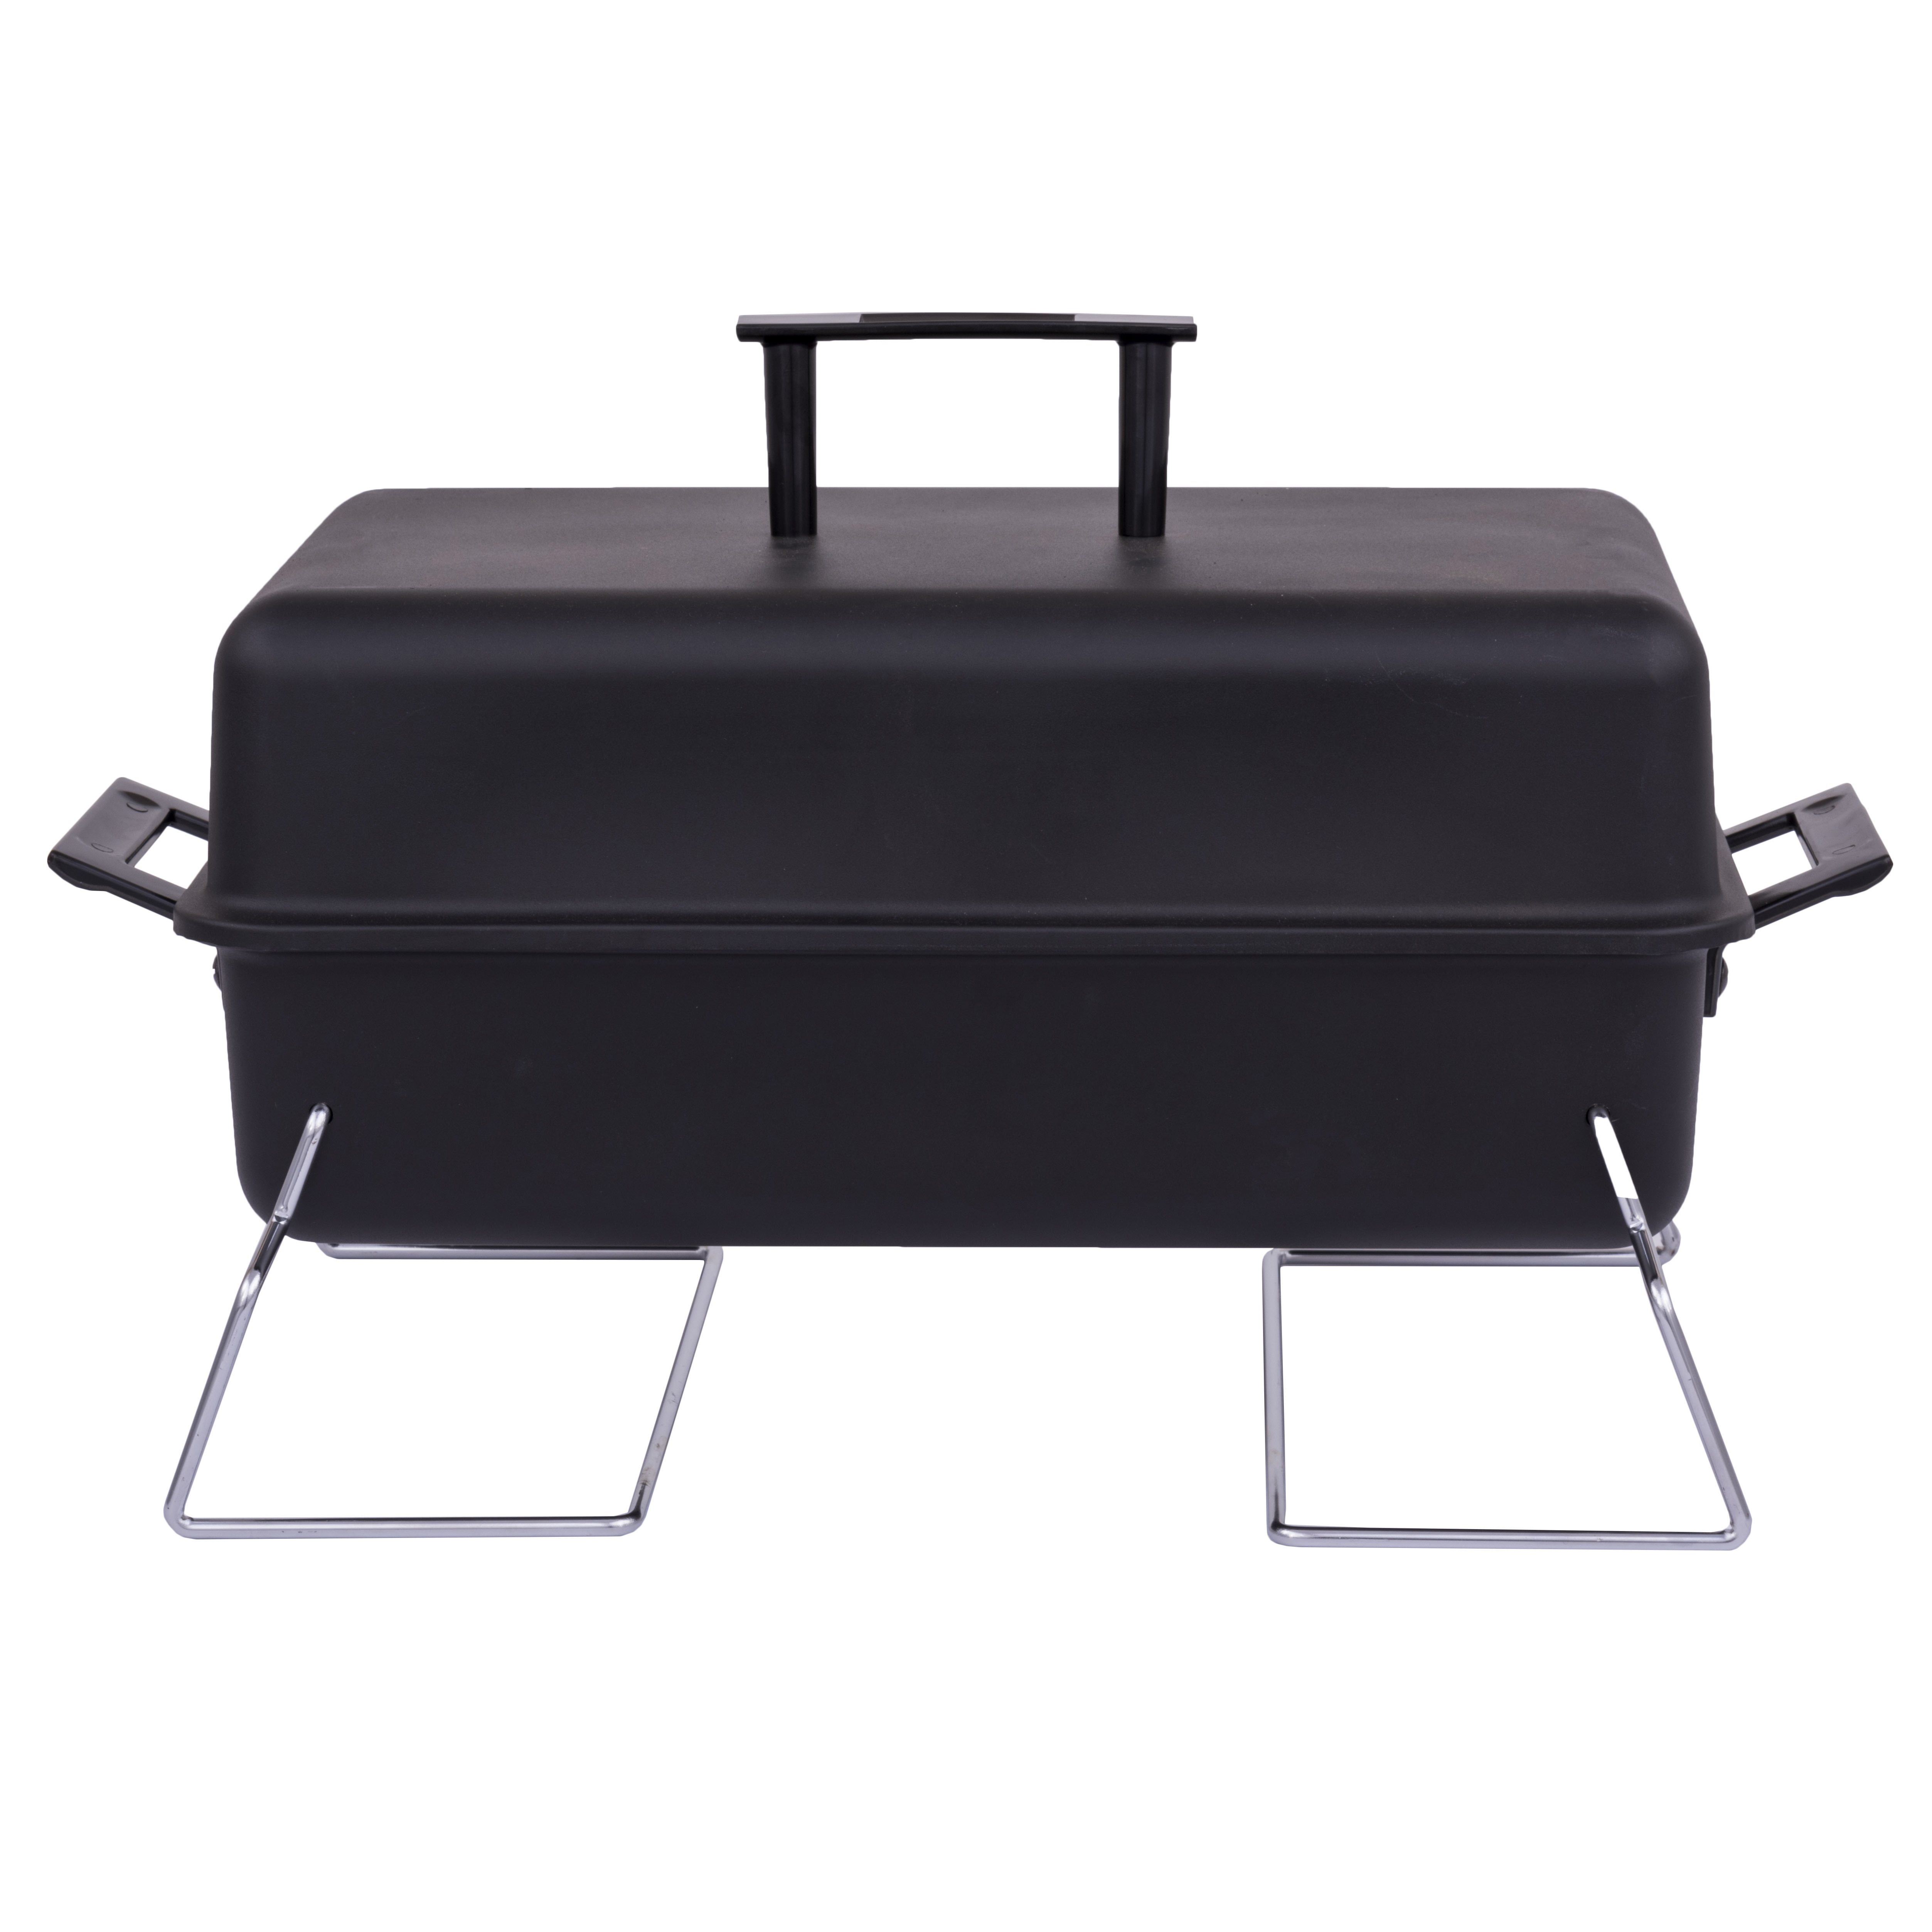 Char-Broil Portable CB500X Charcoal Grill